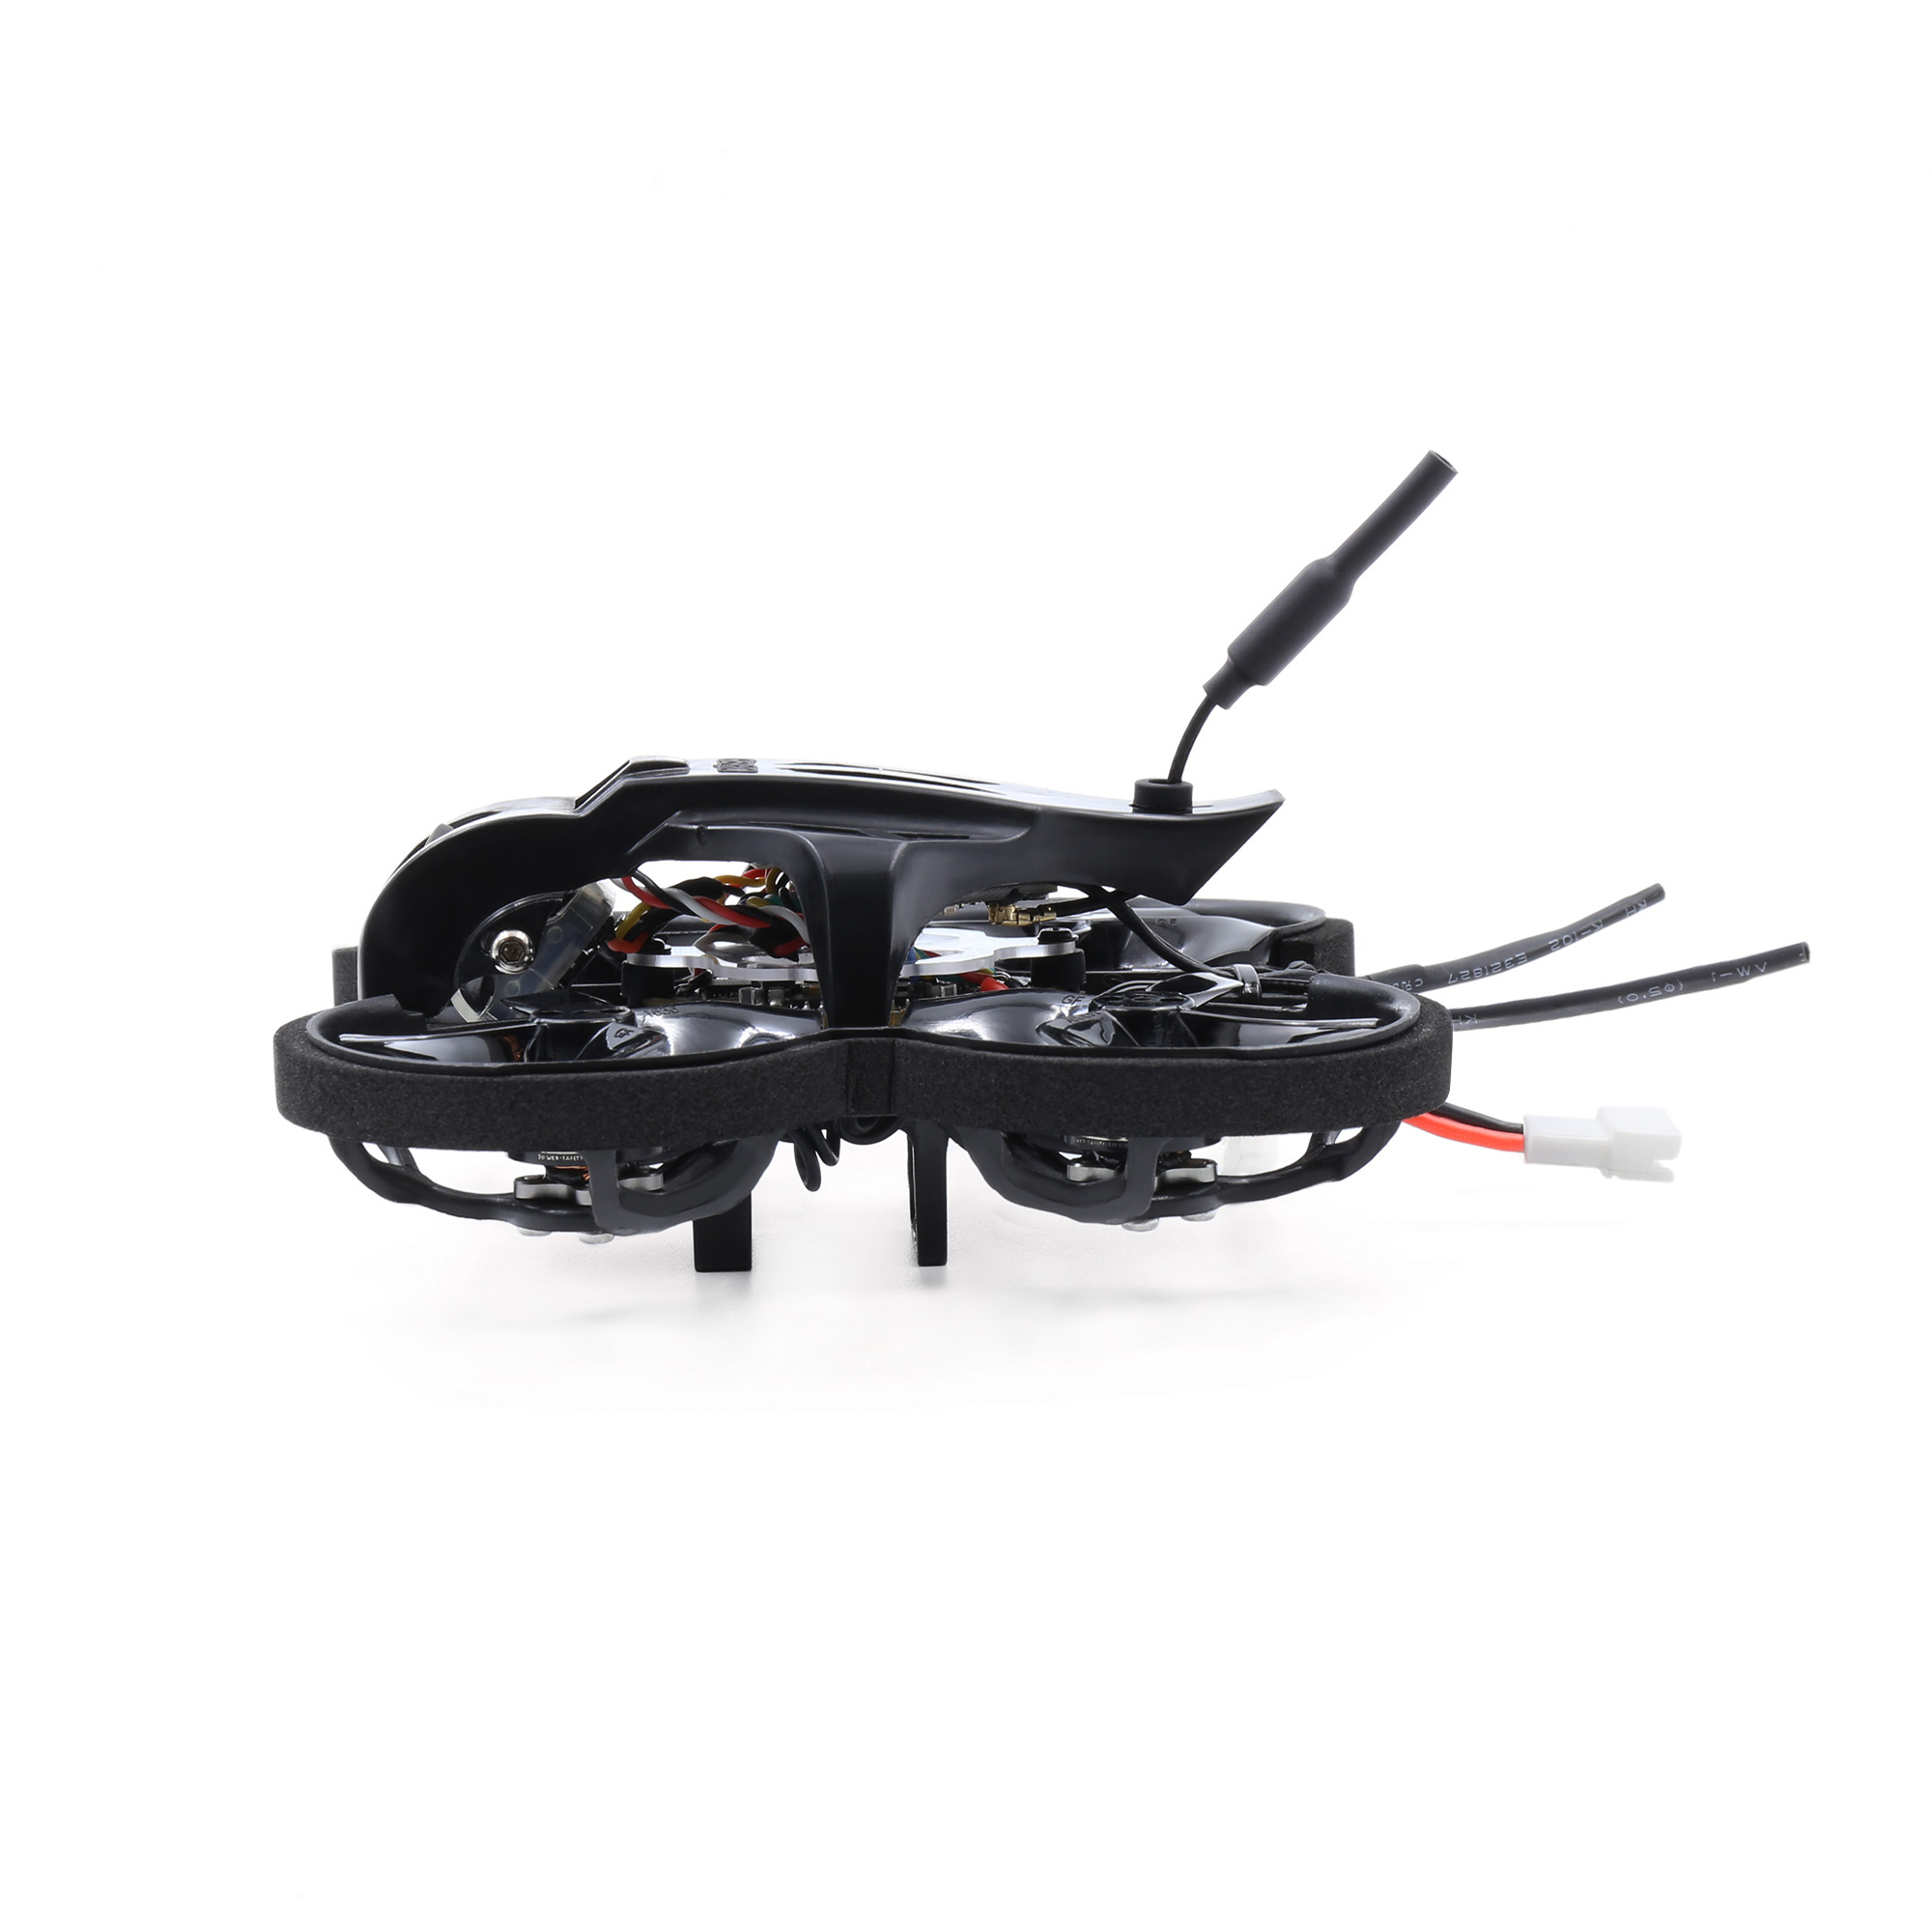 GEPRC TinyGO 1.6inch 2S FPV Indoor Whoop Runcam Nano2 +GR8 Remote Controller+RG1 Goggles RTF Ready To Fly FPV Racing RC Drone 7